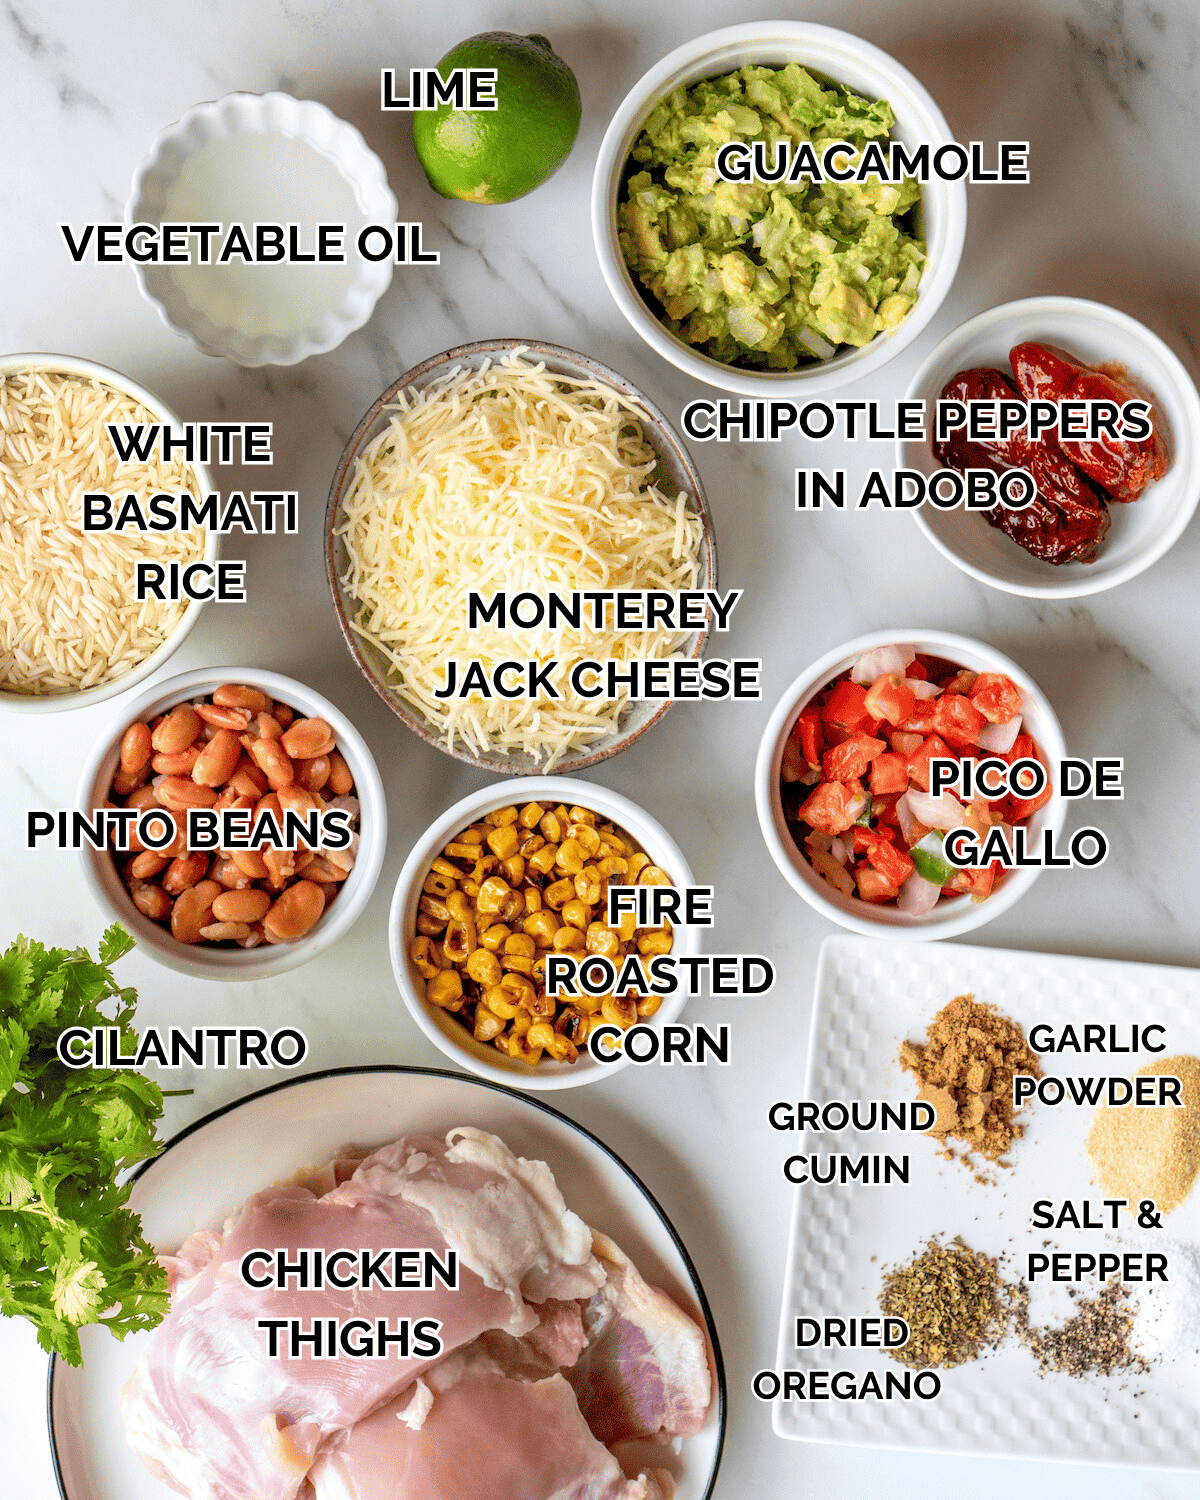 Each of the following ingredients is sitting in an individual prep bowl on a marble countertop.  Vegetable Oil, Chipotle Peppers , Garlic Powder, Boneless Skinless Chicken Thighs, White Basmati Rice, Cilantro, Pinto Beans, Frozen Charred Corn, Guacamole, Pico de Gallo, and Monterey Jack Cheese.  The dry ingredients are sitting on a single plate.  These are the dry ingredients Ground Cumin, Dried Oregano, Black Pepper, and Kosher Salt.